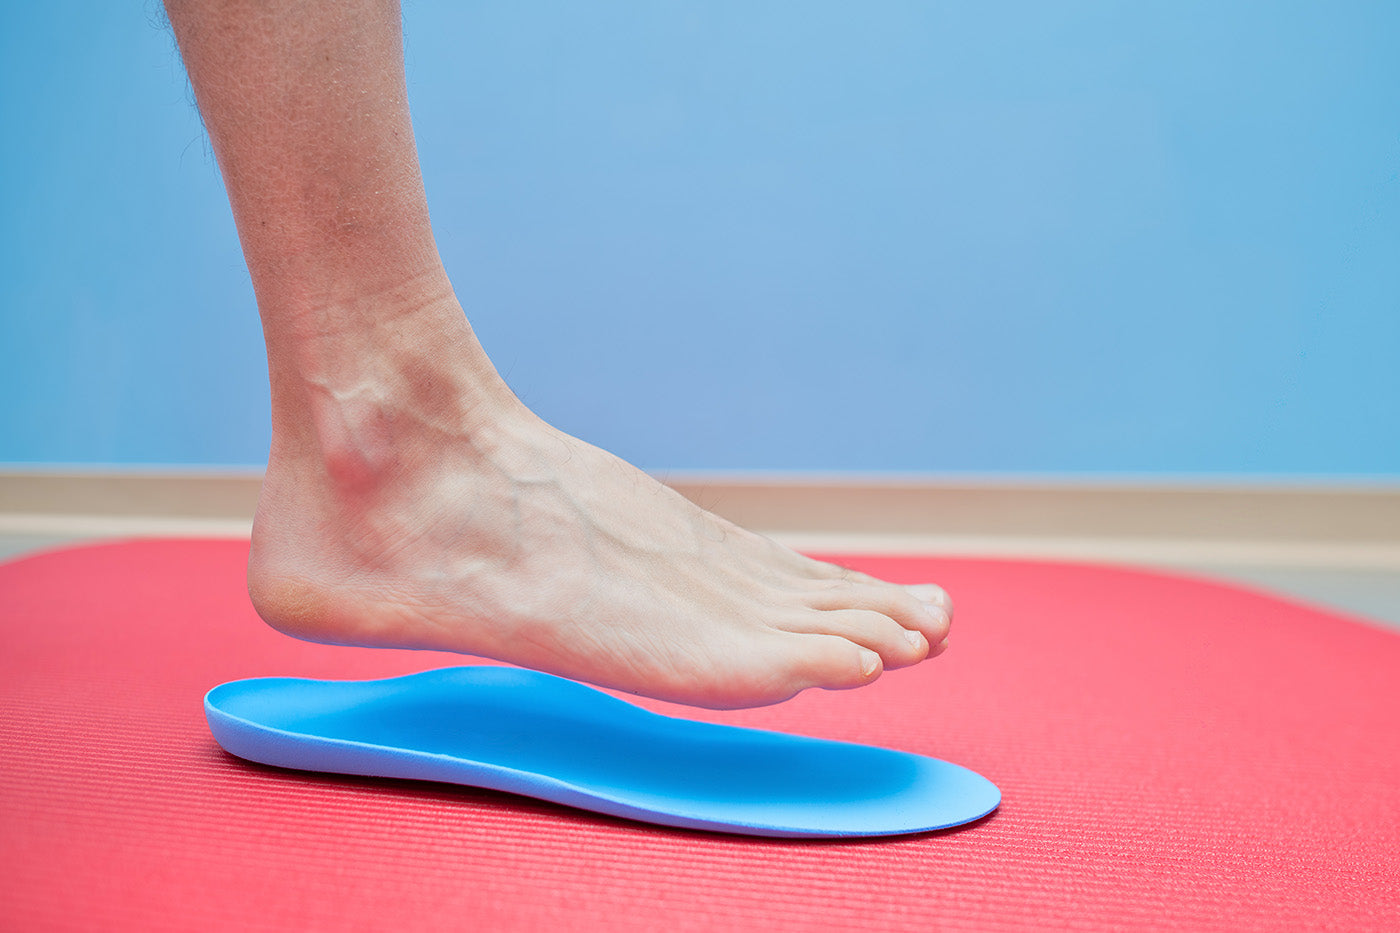 Custom Insoles vs. Off-the-Shelf Options: Which to Choose for Plantar Fasciitis